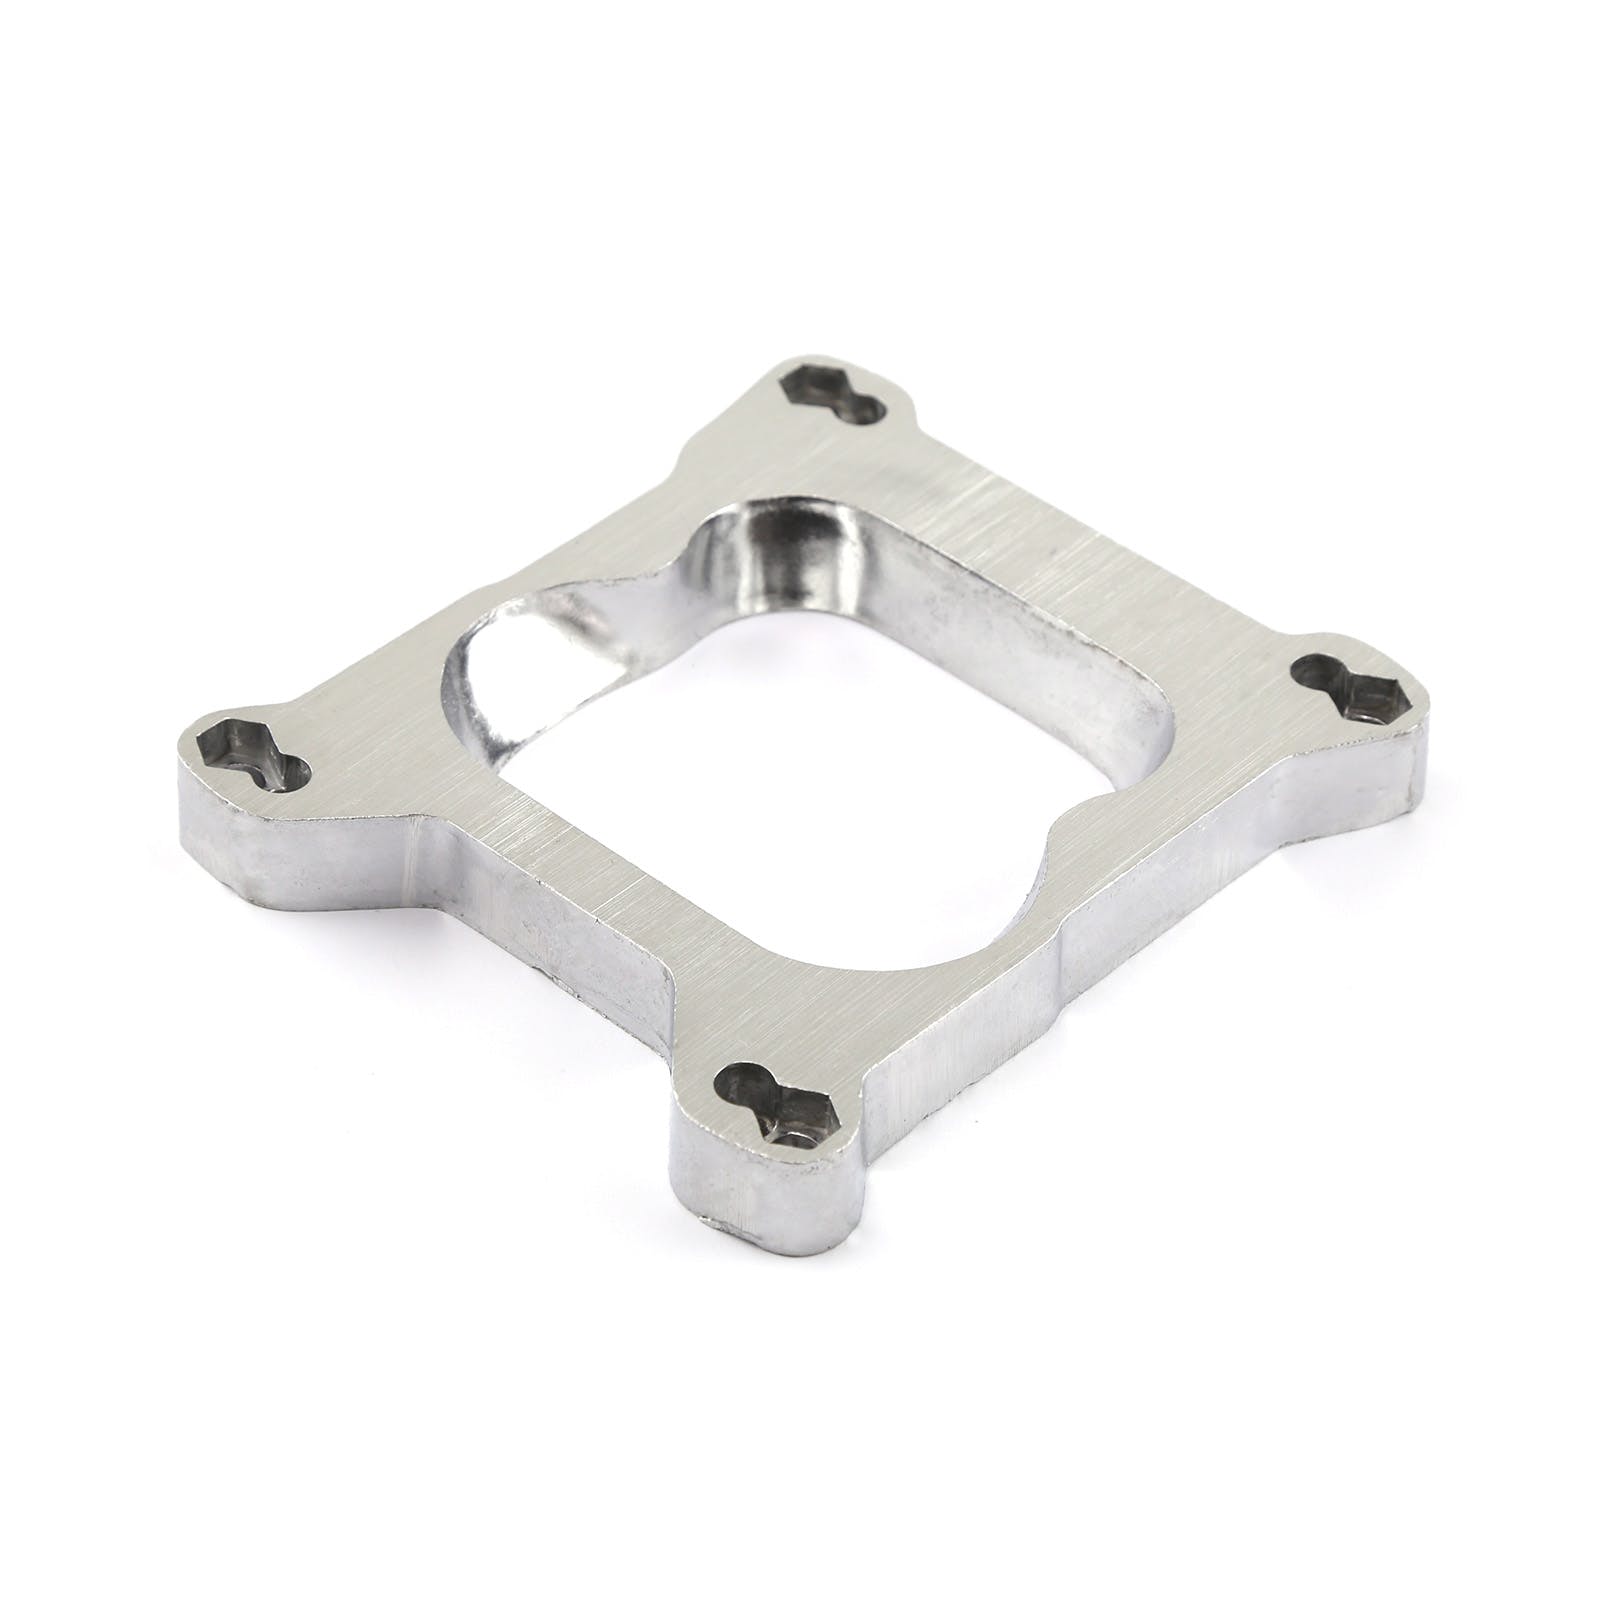 Speedmaster PCE110.1004 1 Aluminum Carb Adapter Only Holley to Quadrajet Q-Jet and Spreadbore